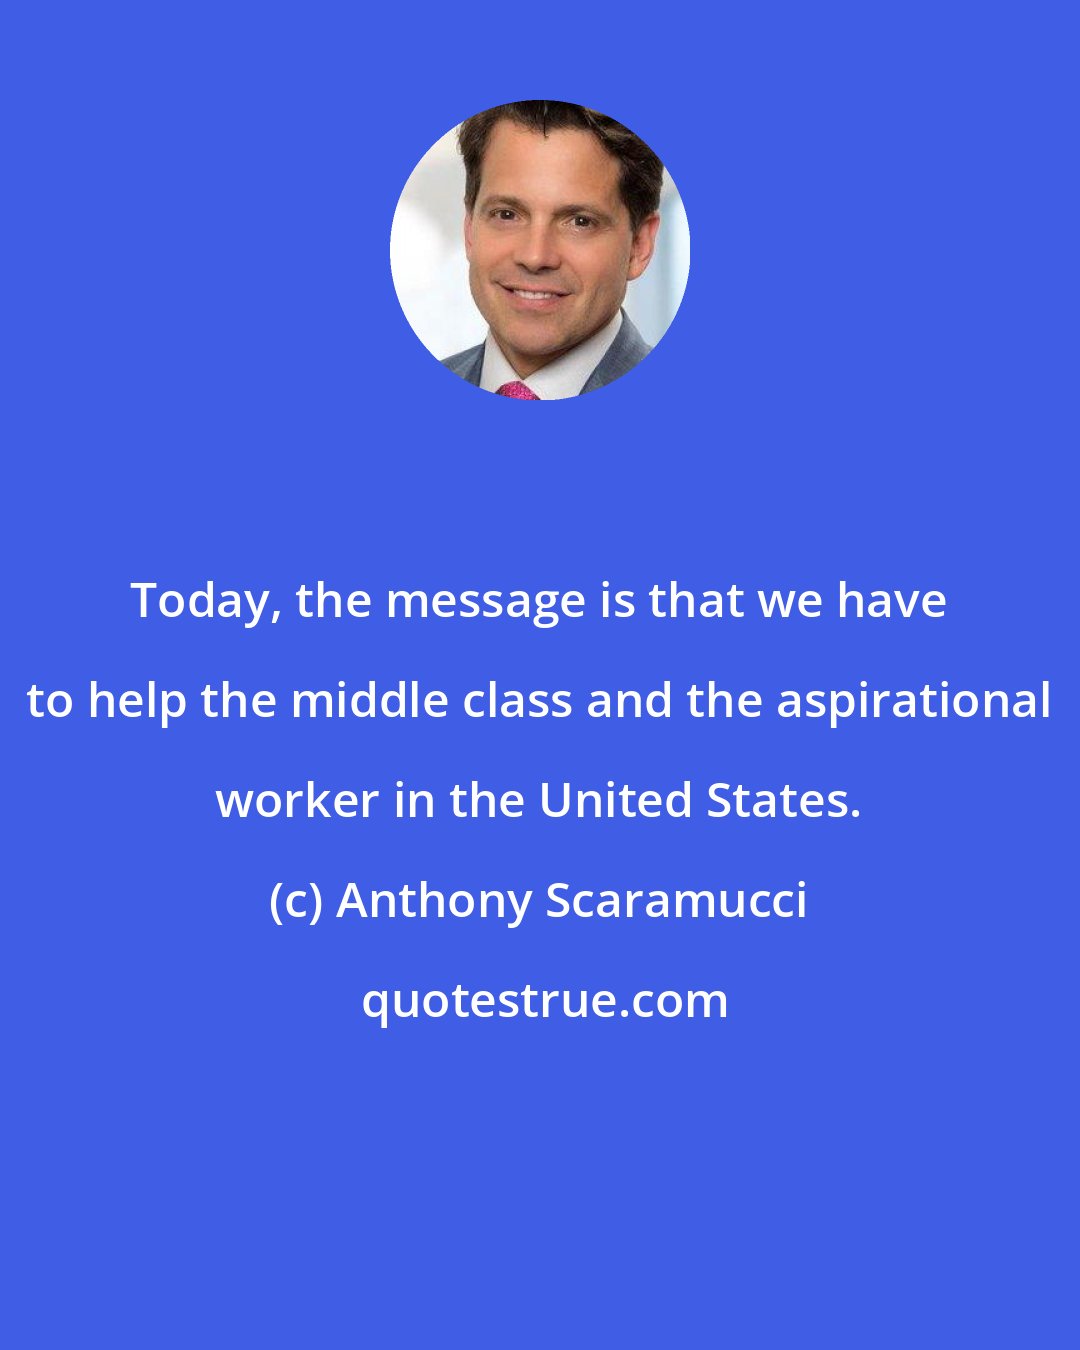 Anthony Scaramucci: Today, the message is that we have to help the middle class and the aspirational worker in the United States.